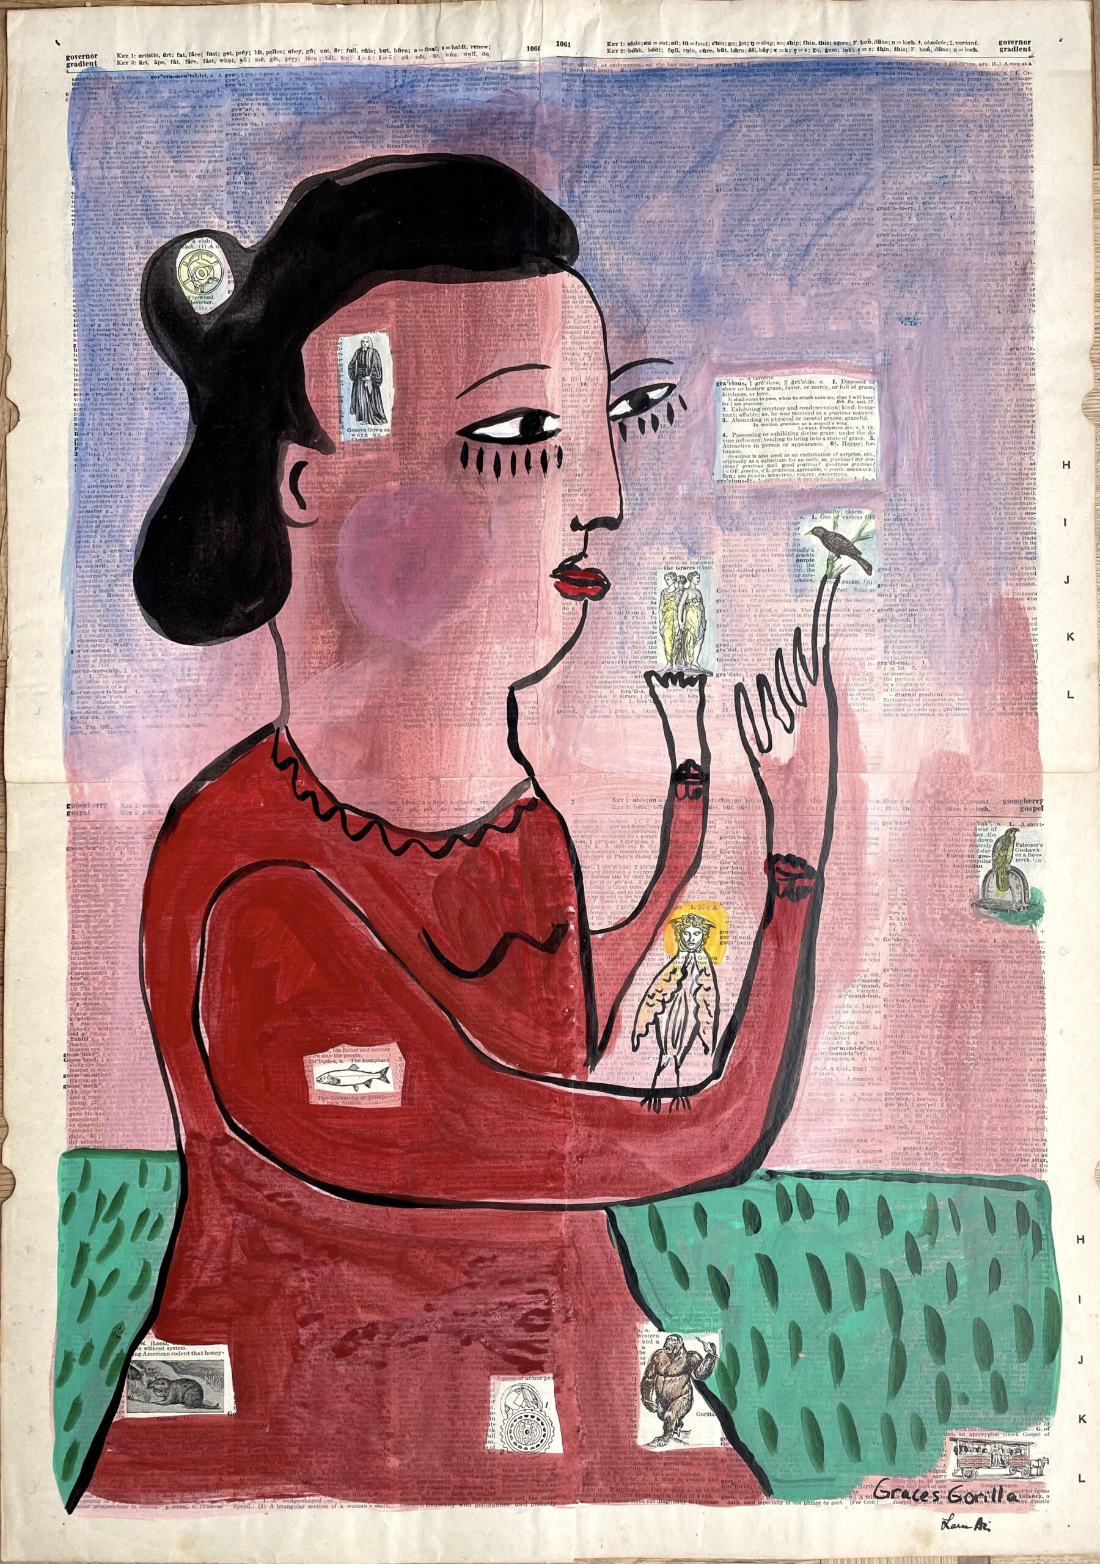 one hand-drawn figure of a woman holding a tiny bird and other tiny objects on her fingers and arms on a painted-over dictionary page